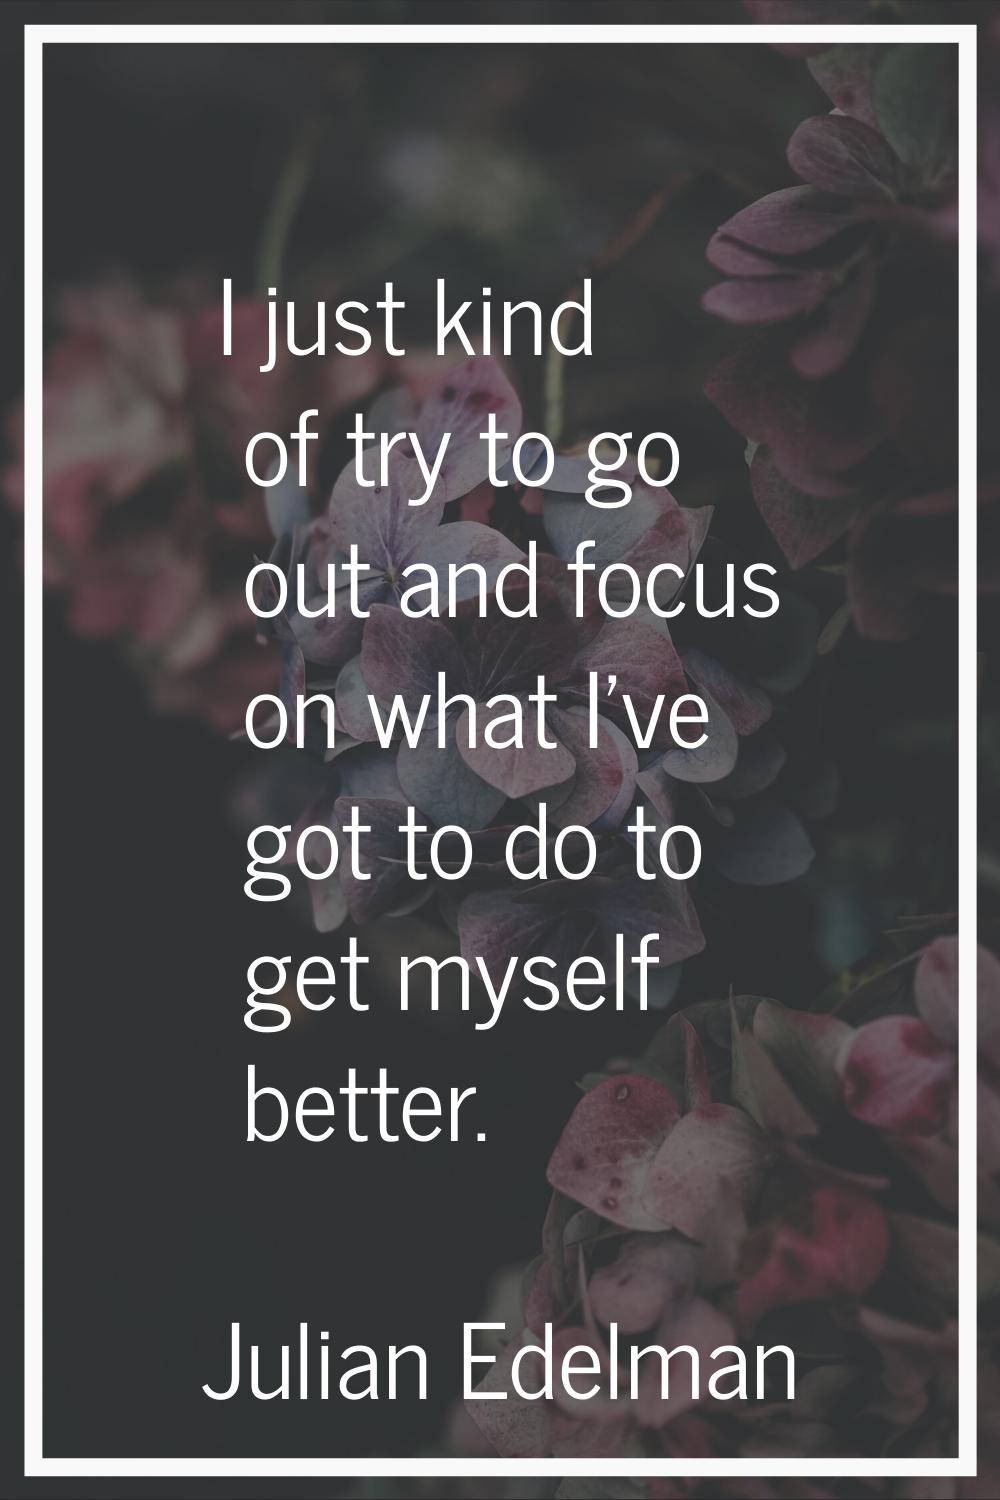 I just kind of try to go out and focus on what I've got to do to get myself better.